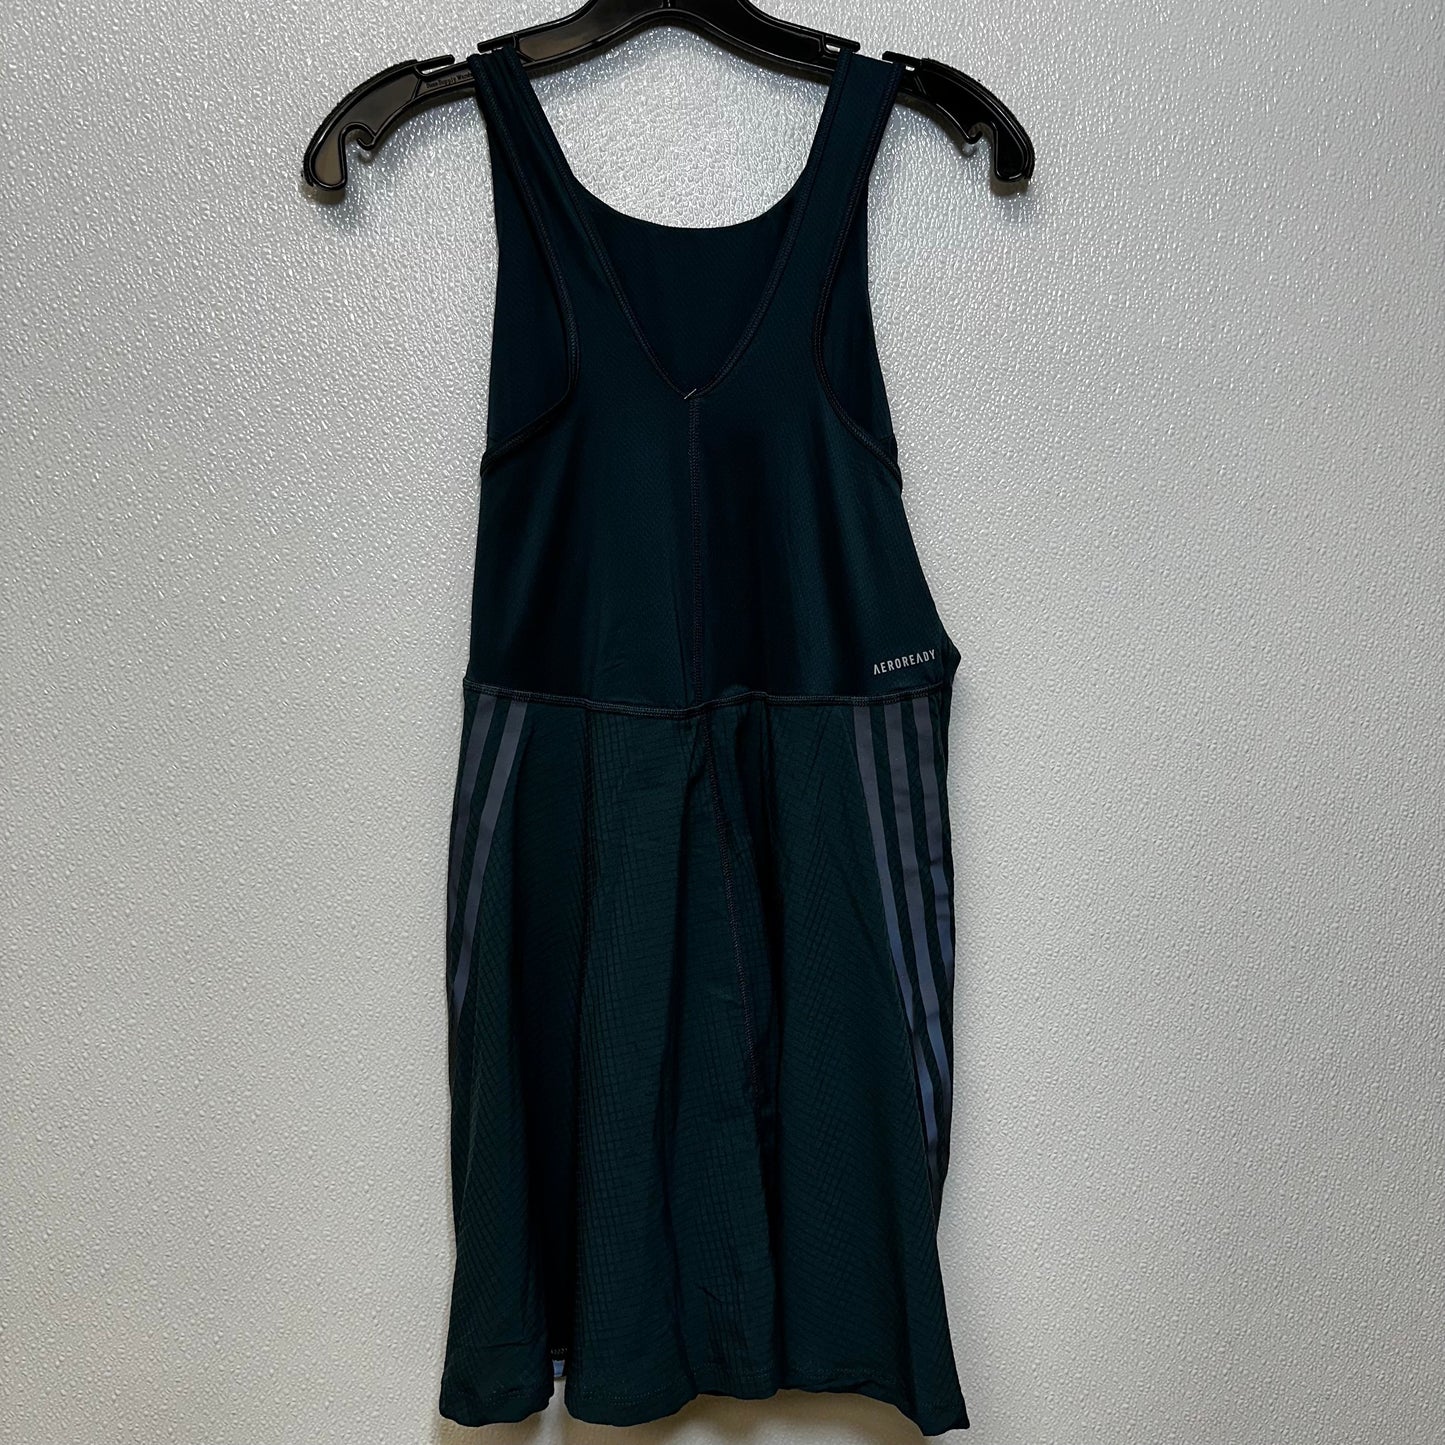 Teal Athletic Dress Adidas, Size M